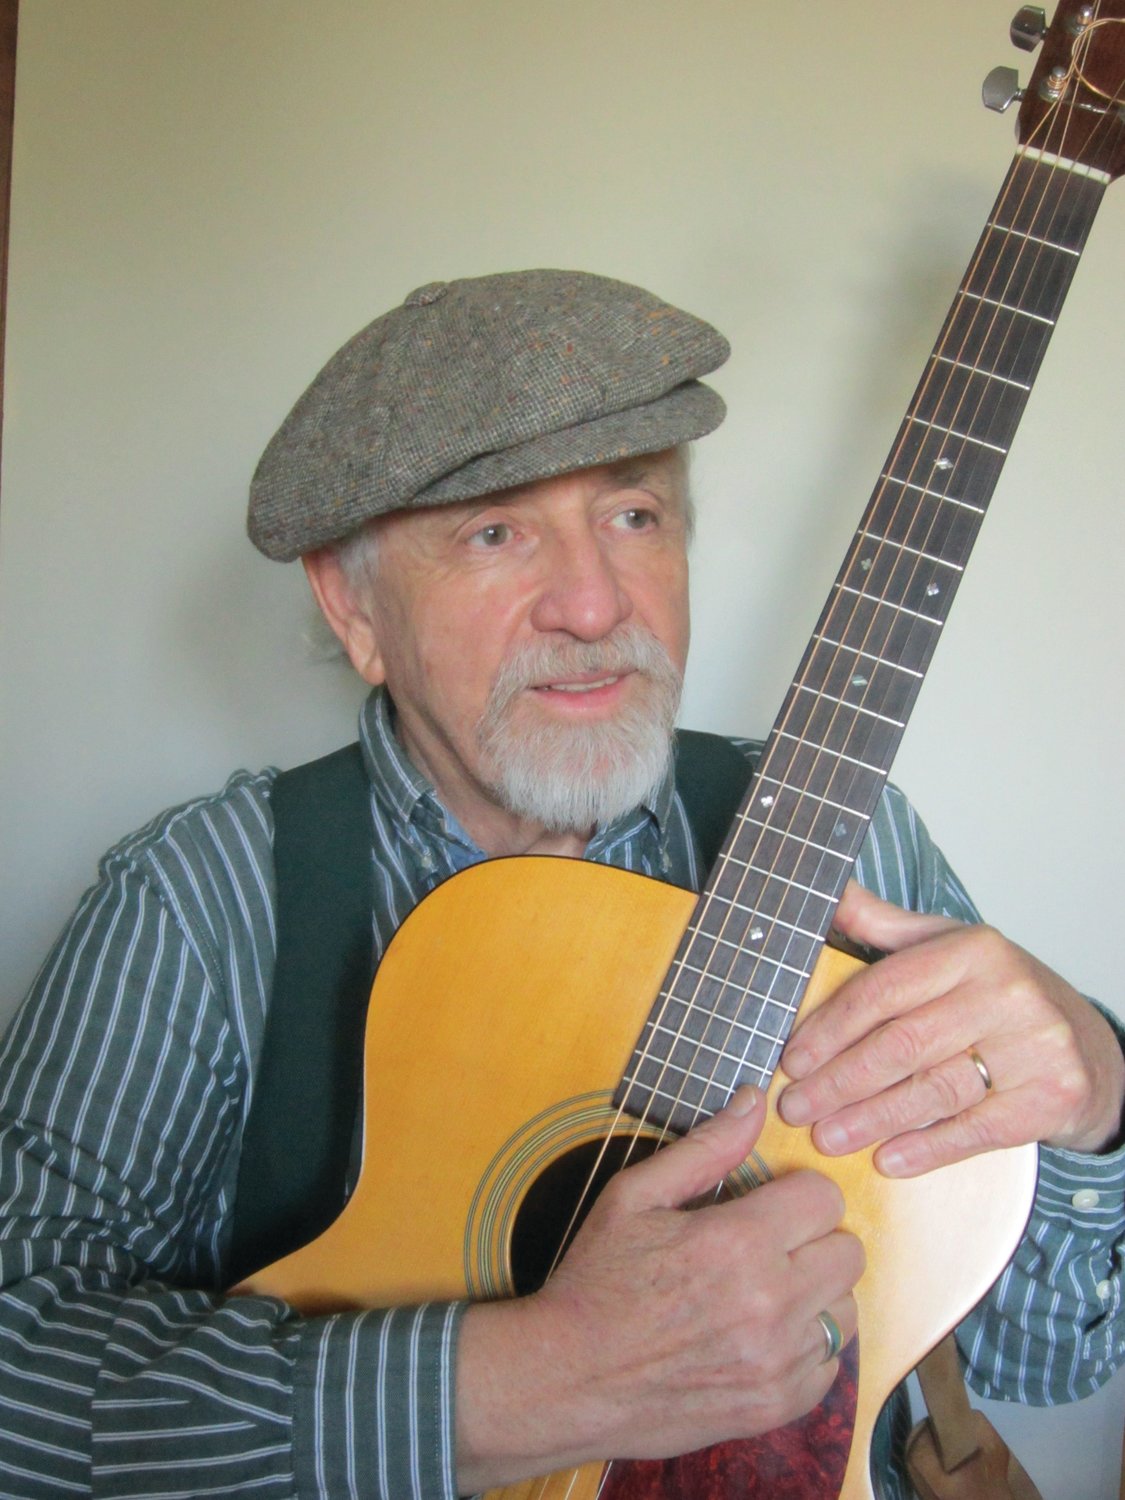 Mike James, a Port Townsend 
resident, will perform for Trinity United Methodist Church’s Candlelight 
Concert series with half of the proceeds going to YEA Music!,  a nonprofit dedicated to providing musical opportunities for the youth of East Jefferson.